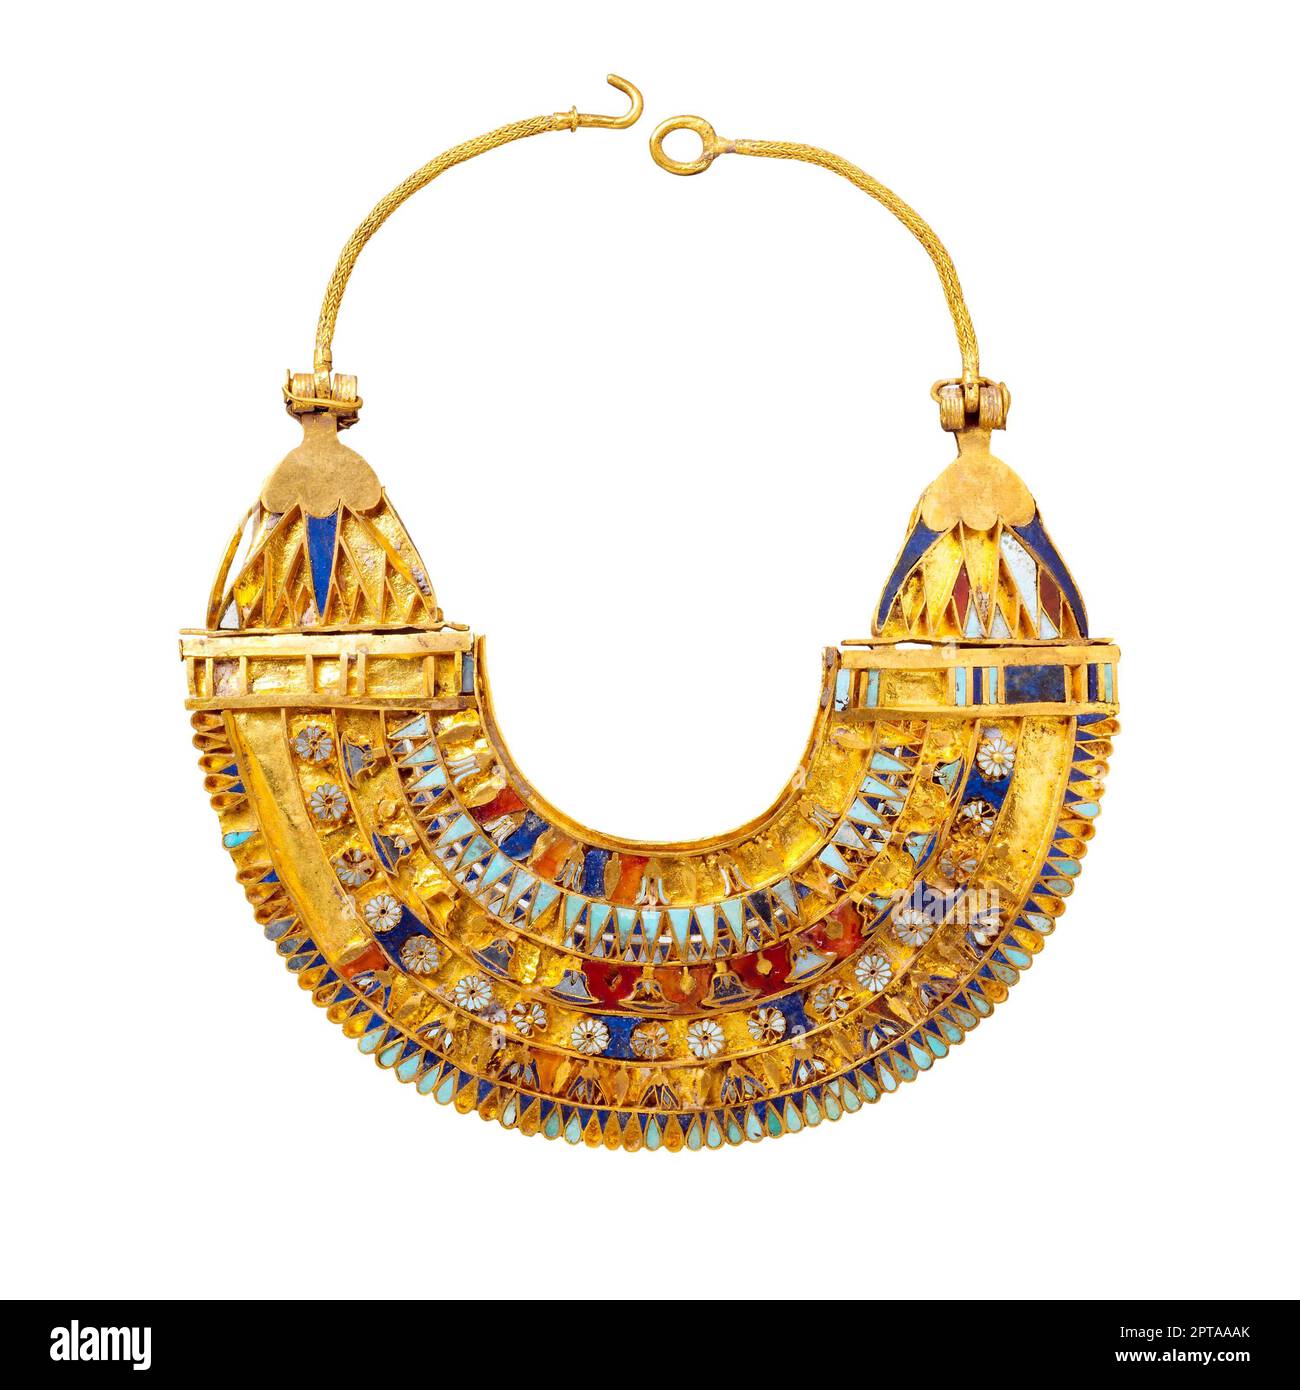 The 11 Lavish Pieces of Jewelry from Ancient Egypt - YouTube